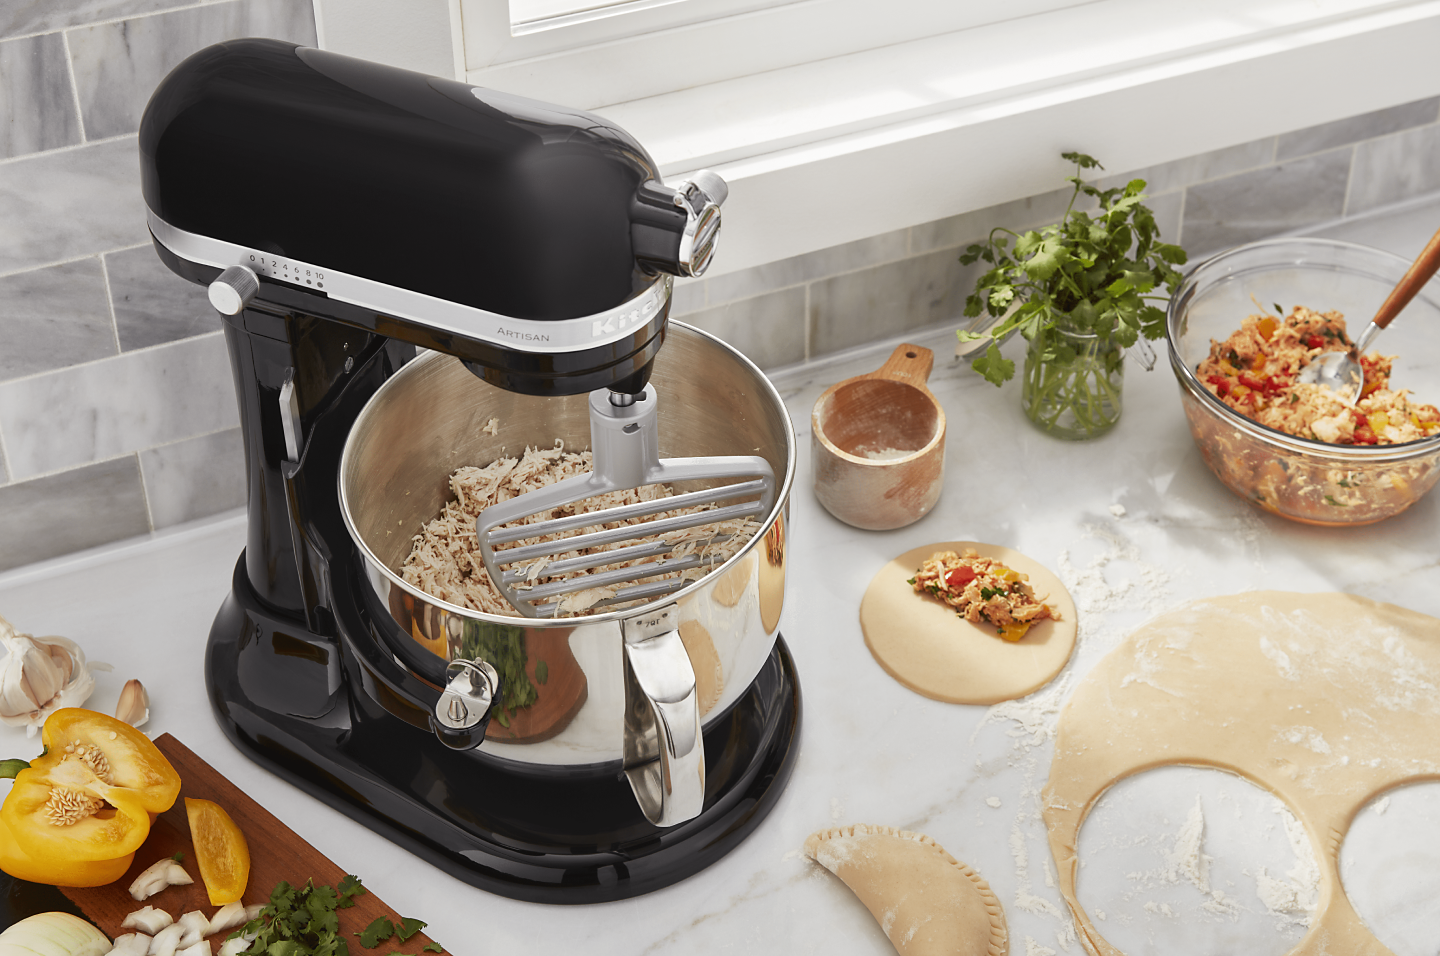 https://kitchenaid-h.assetsadobe.com/is/image/content/dam/business-unit/kitchenaid/en-us/marketing-content/site-assets/page-content/pinch-of-help/how-to-shred-chicken-in-a-stand-mixer/Shred-Chicken_2.png?fmt=png-alpha&qlt=85,0&resMode=sharp2&op_usm=1.75,0.3,2,0&scl=1&constrain=fit,1